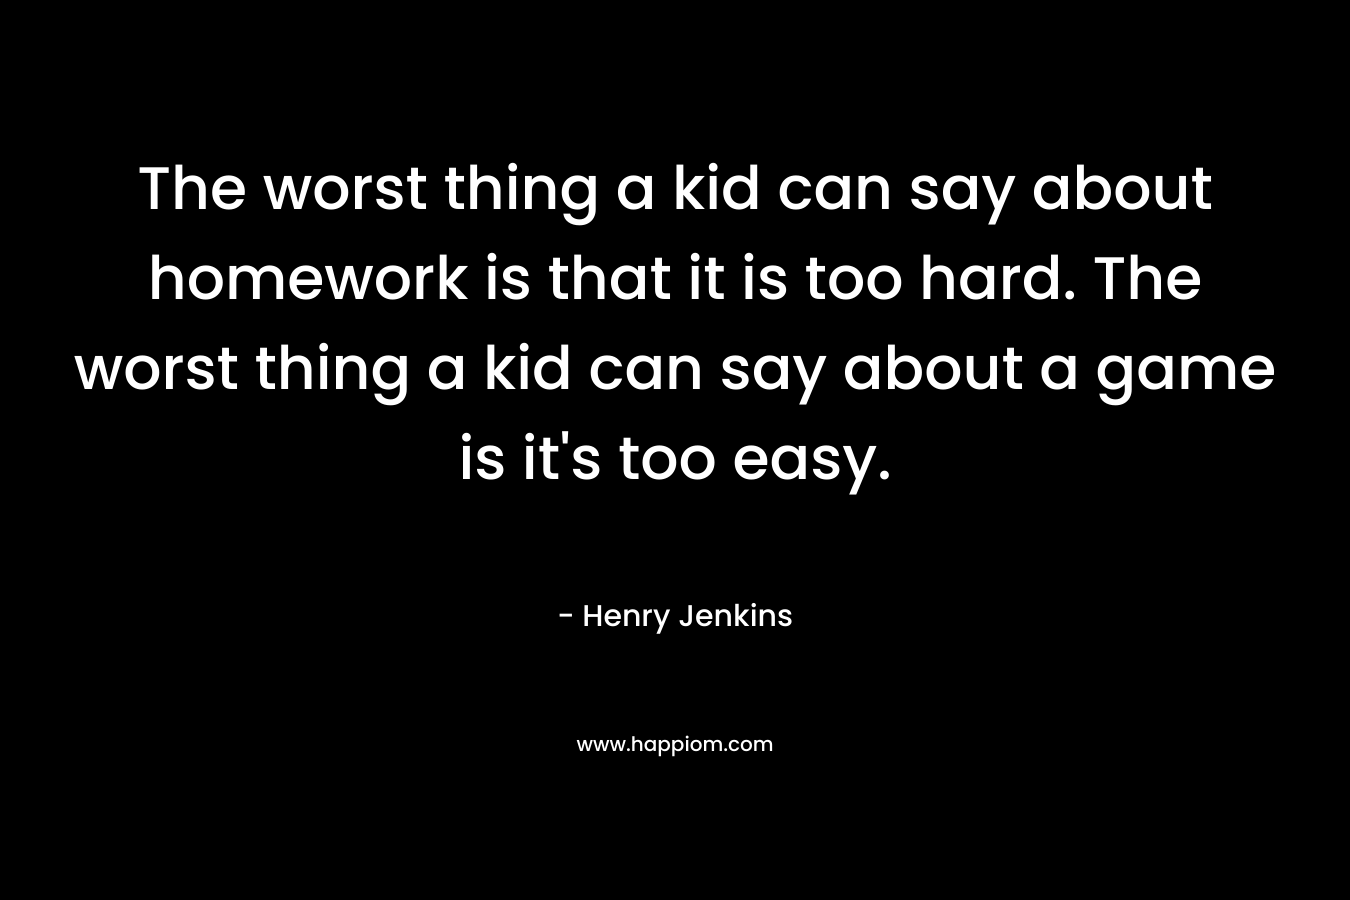 The worst thing a kid can say about homework is that it is too hard. The worst thing a kid can say about a game is it's too easy.